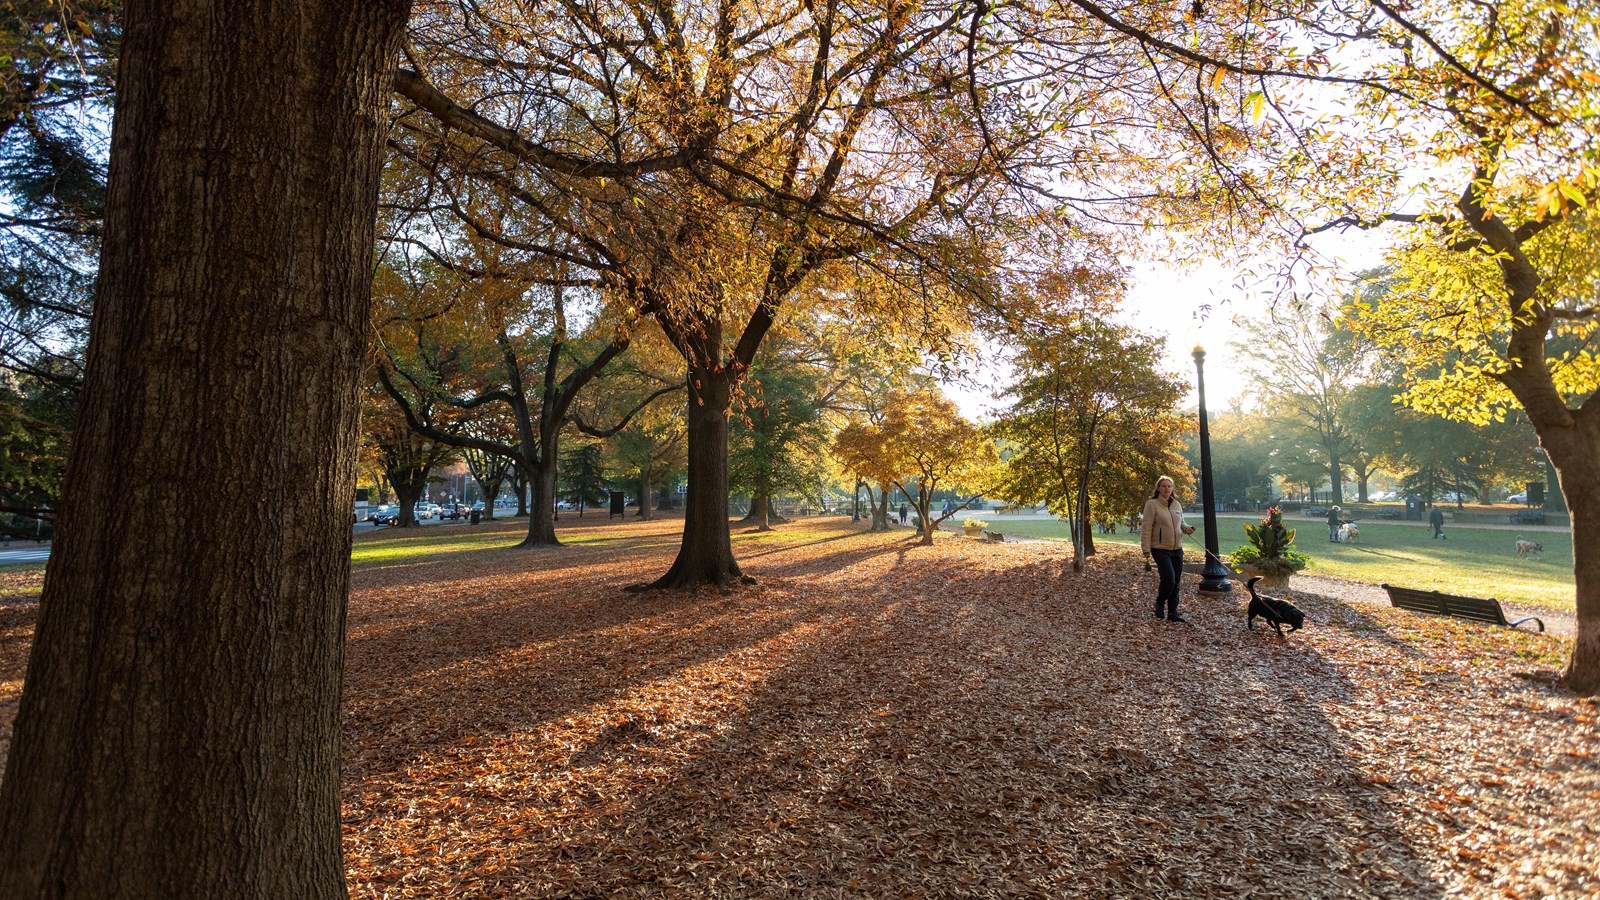 Rays of sun stream through golden trees in autumn in a city park.